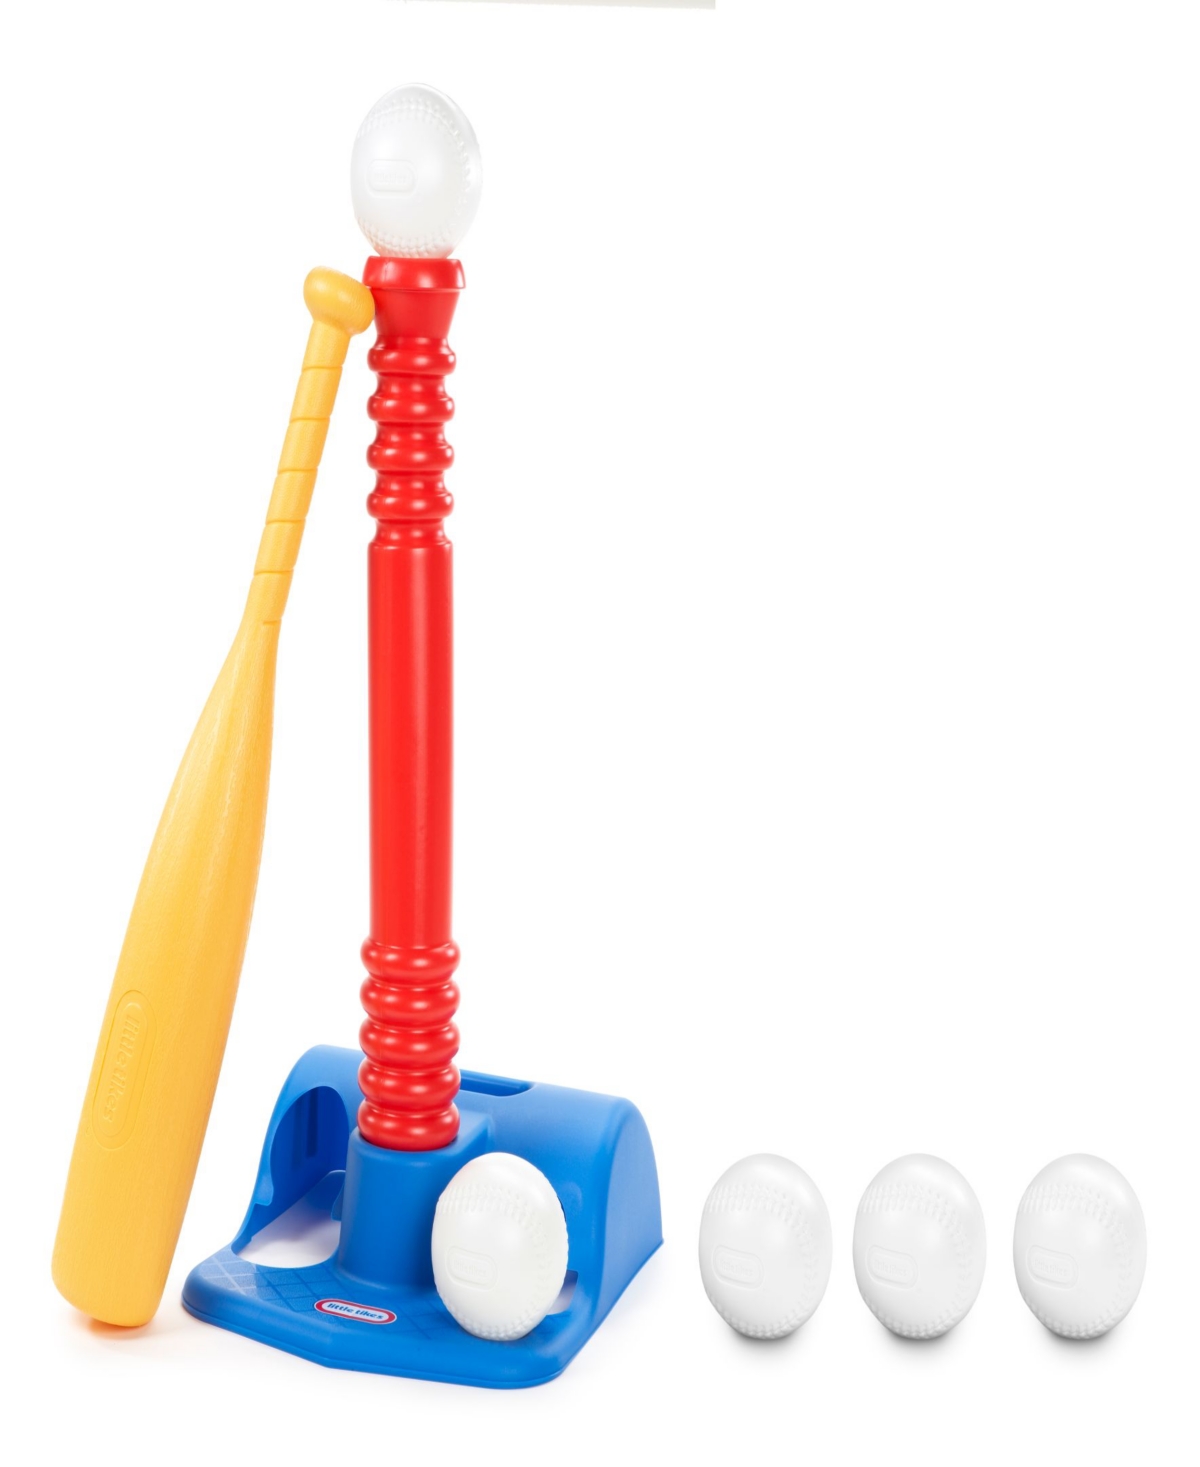 Little Tikes Totsports T-ball Set In Multicolor